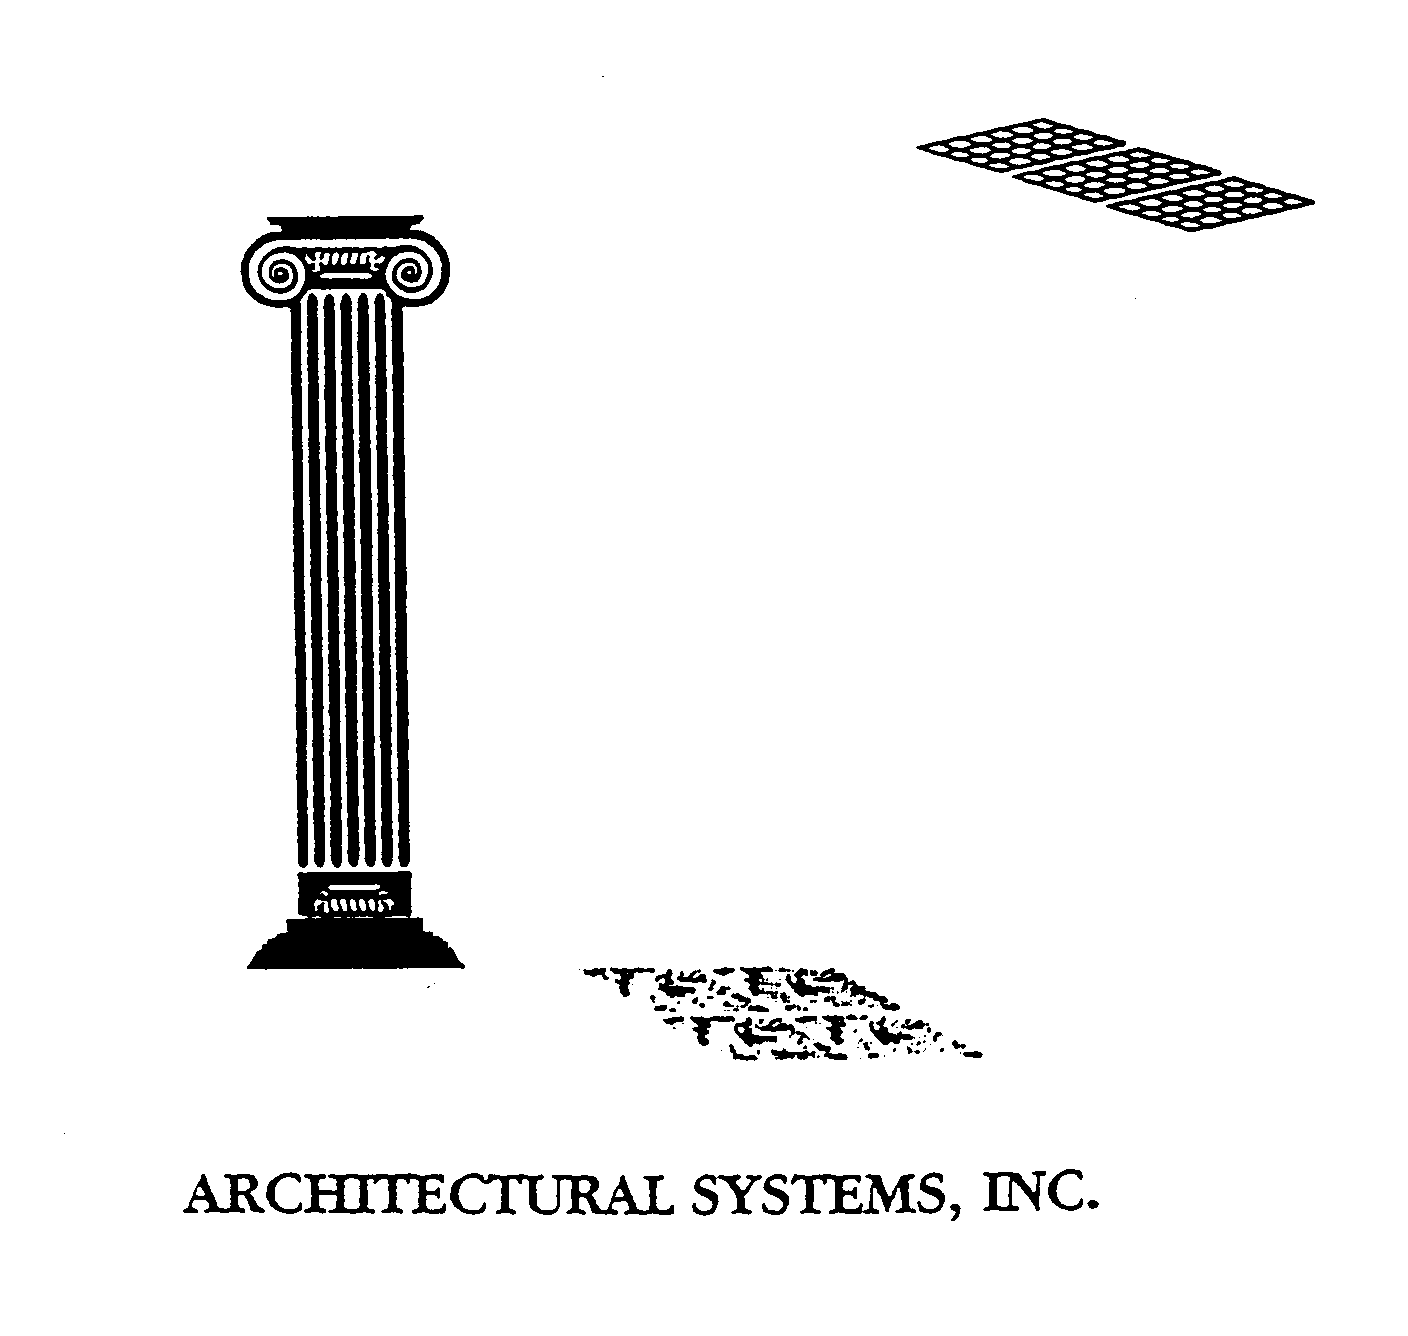  ARCHITECTURAL SYSTEMS, INC.